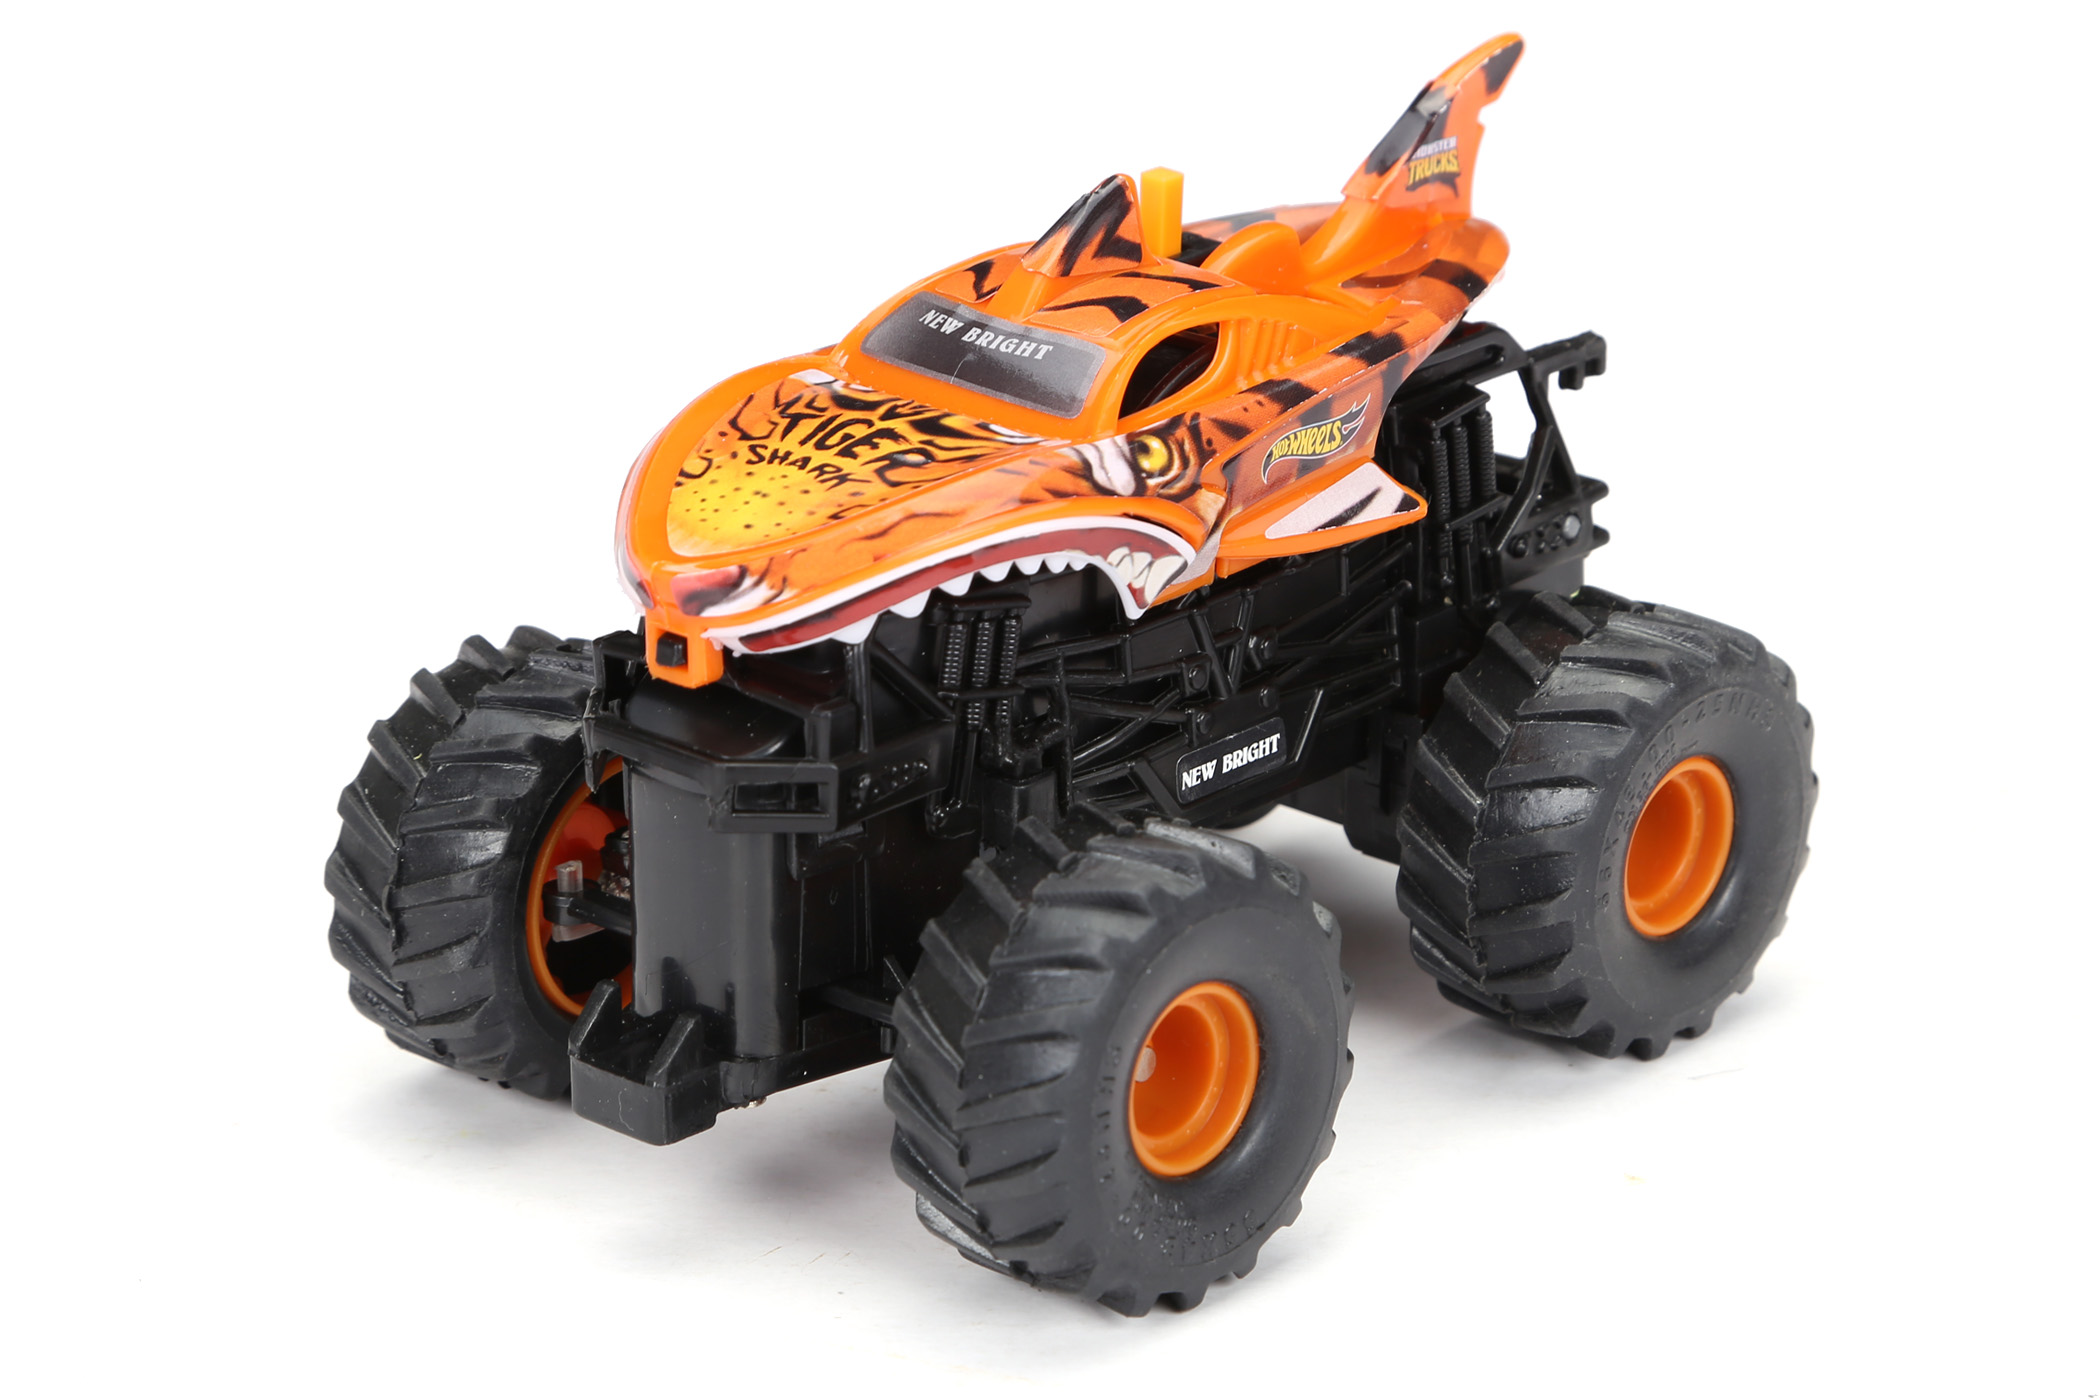 New Bright RC 1:43 Scale Remote Control Hot Wheels Tiger Shark Monster Truck 2.4GHz - image 1 of 8